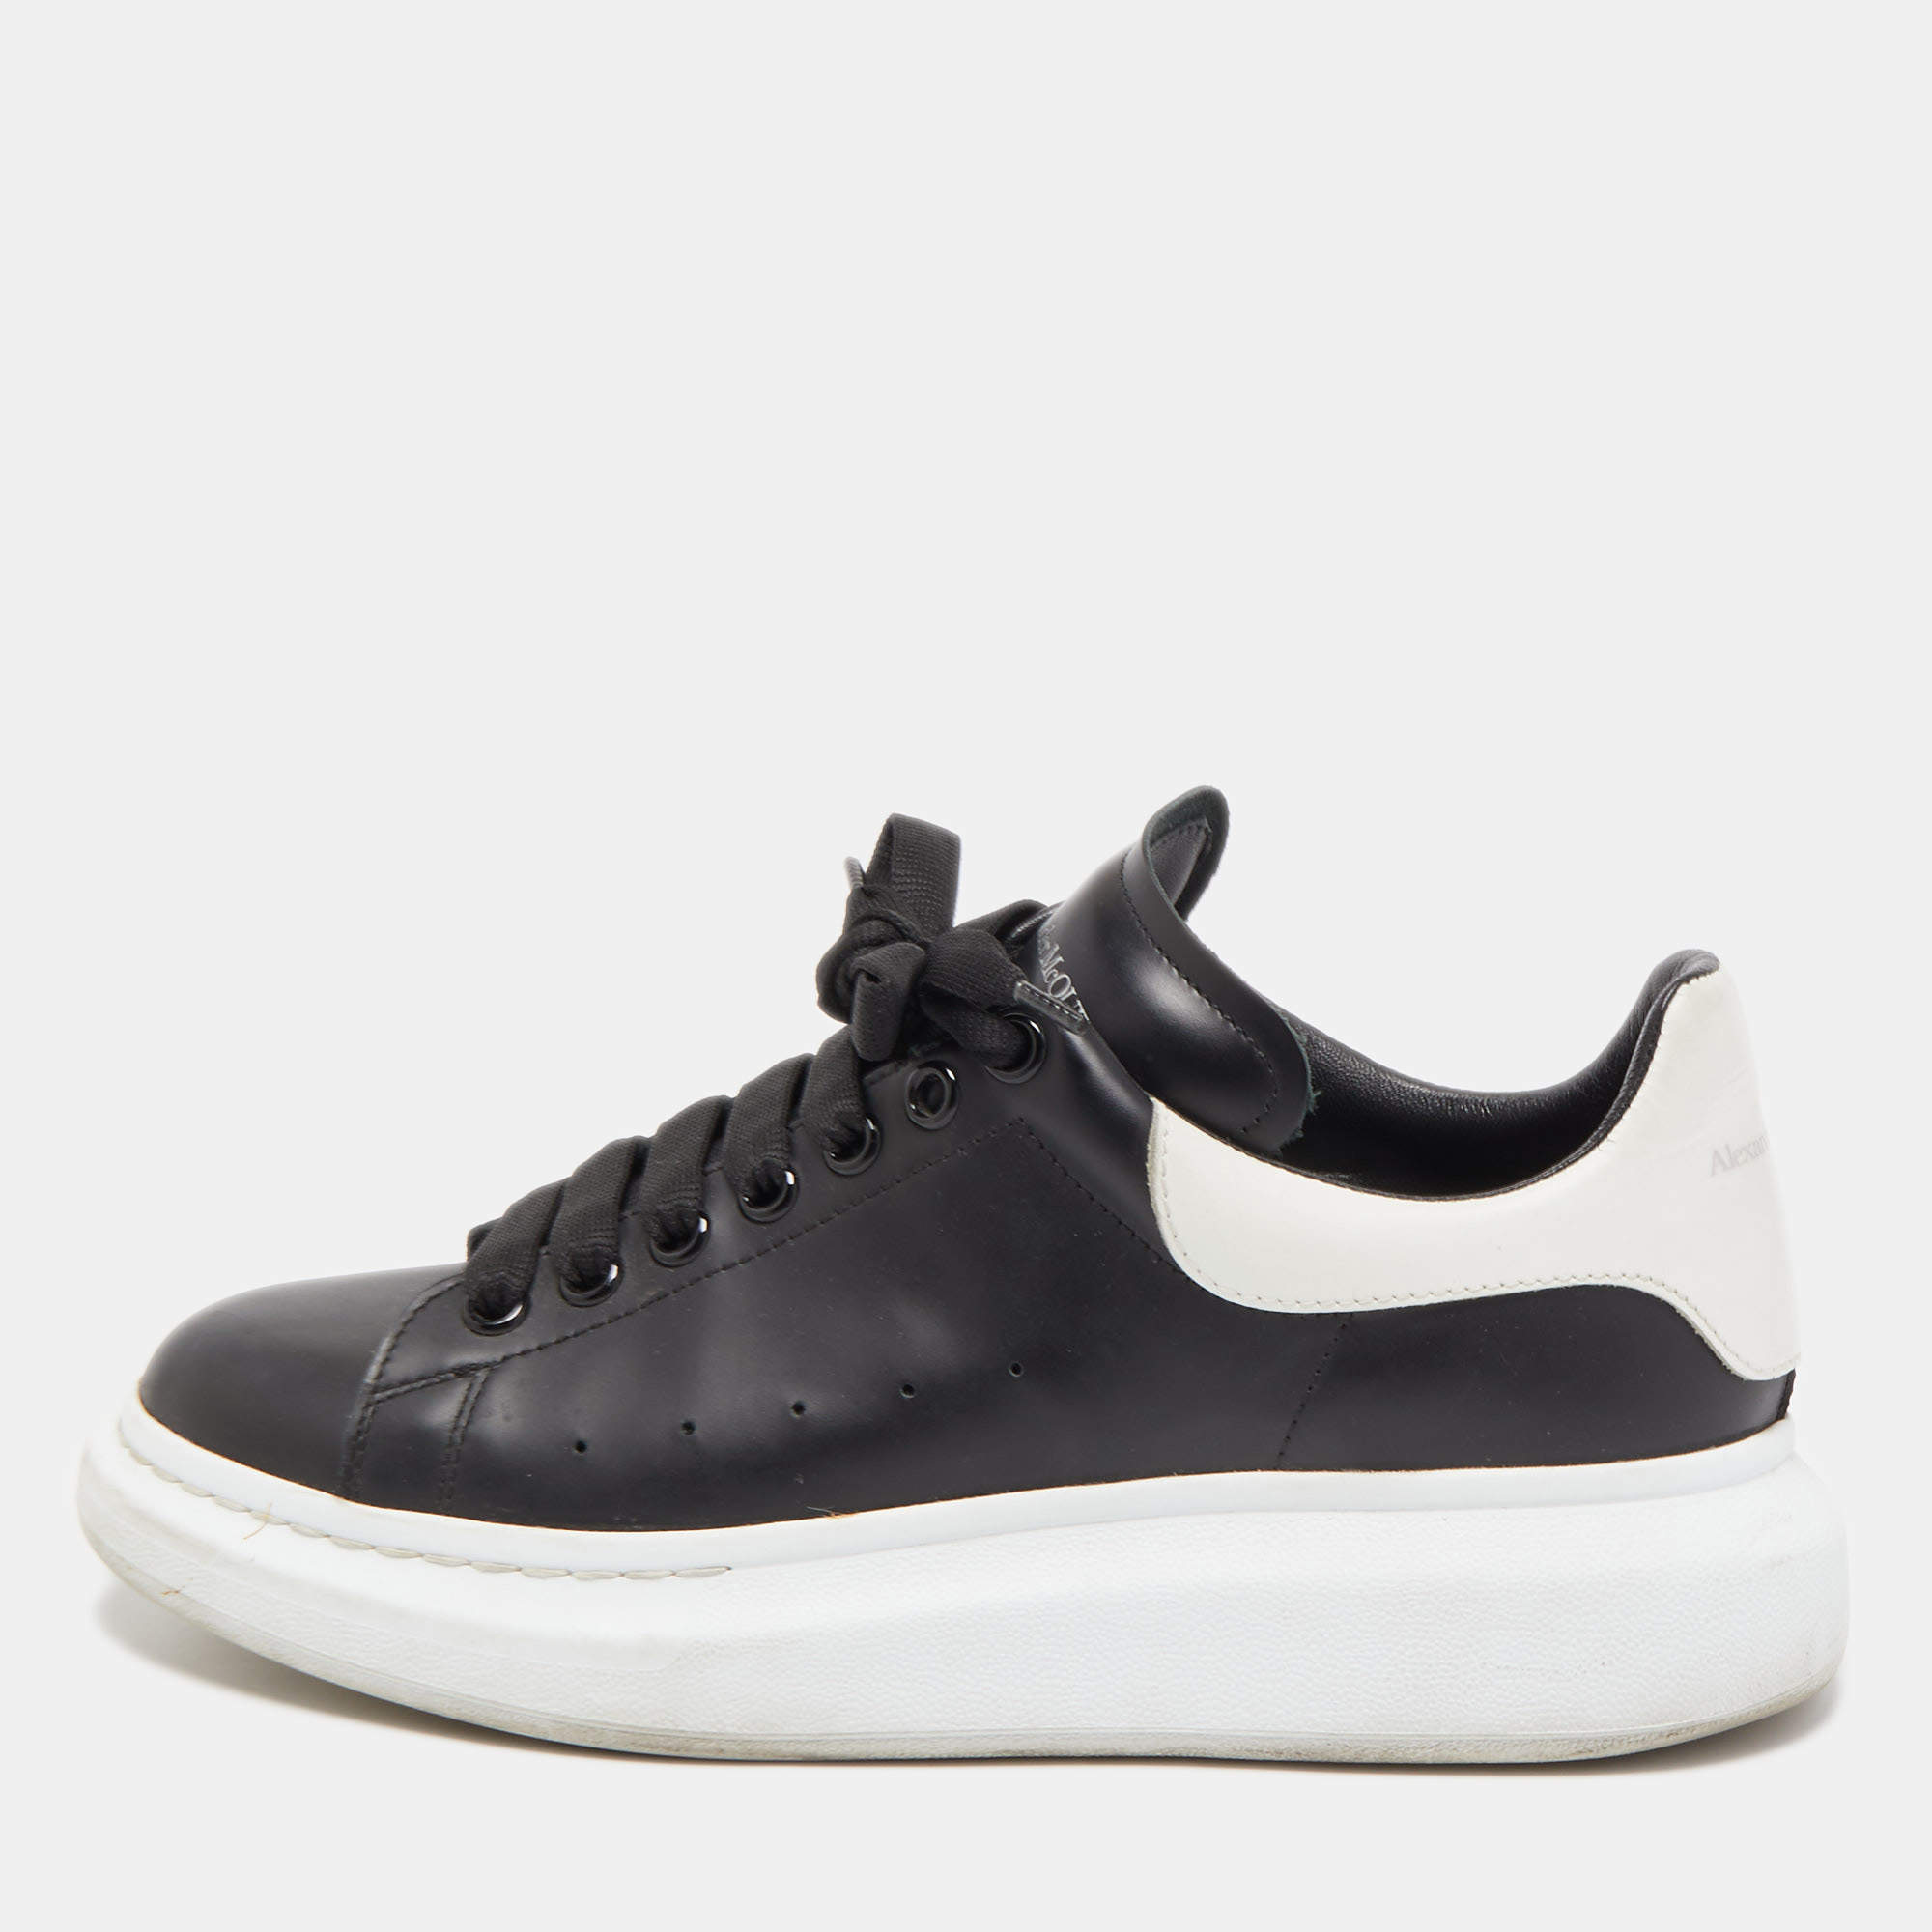 THE OUTNET McQ by Alexander McQueen Gishiki leather-trimmed stretch-knit  sneakers 360.00